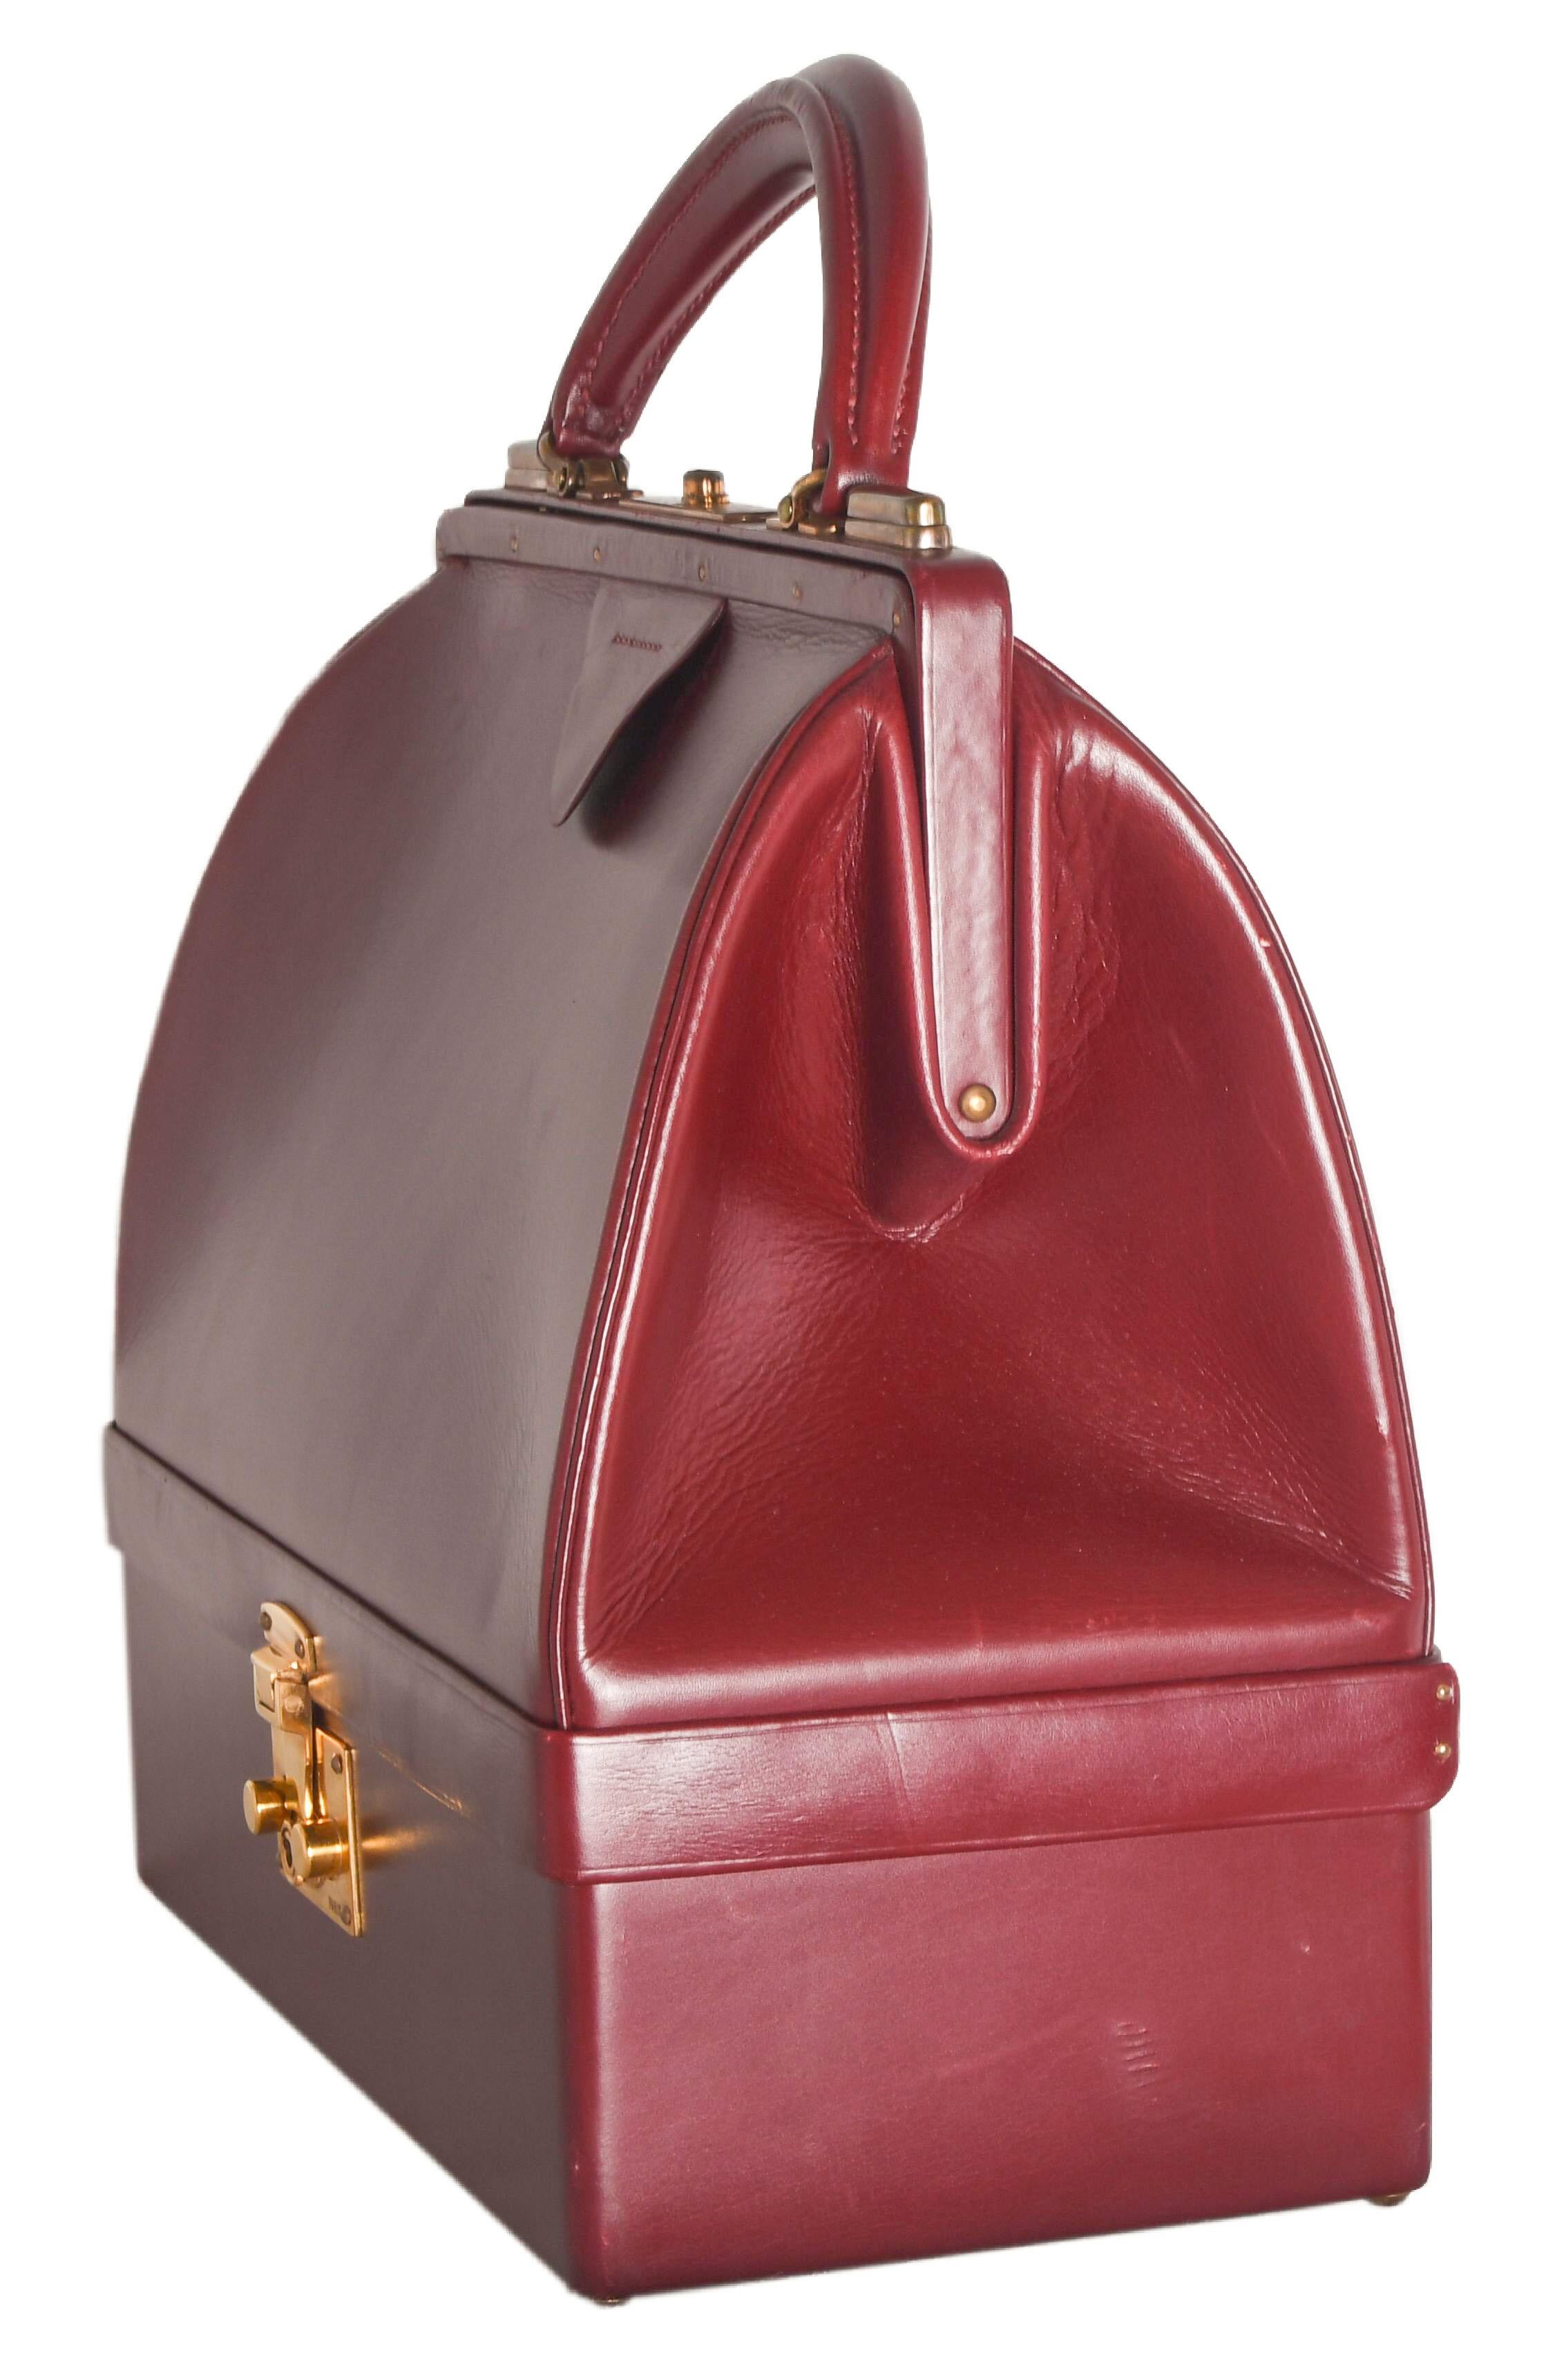 Hermes Vintage Sac Mallette was originally designed as a travel case during the Roaring '20s.  Now it doubles as a sophisticated handbag with purpose.  Quite rare, this exceptionally stunning piece is a must have for collectors. Glossy rouge box